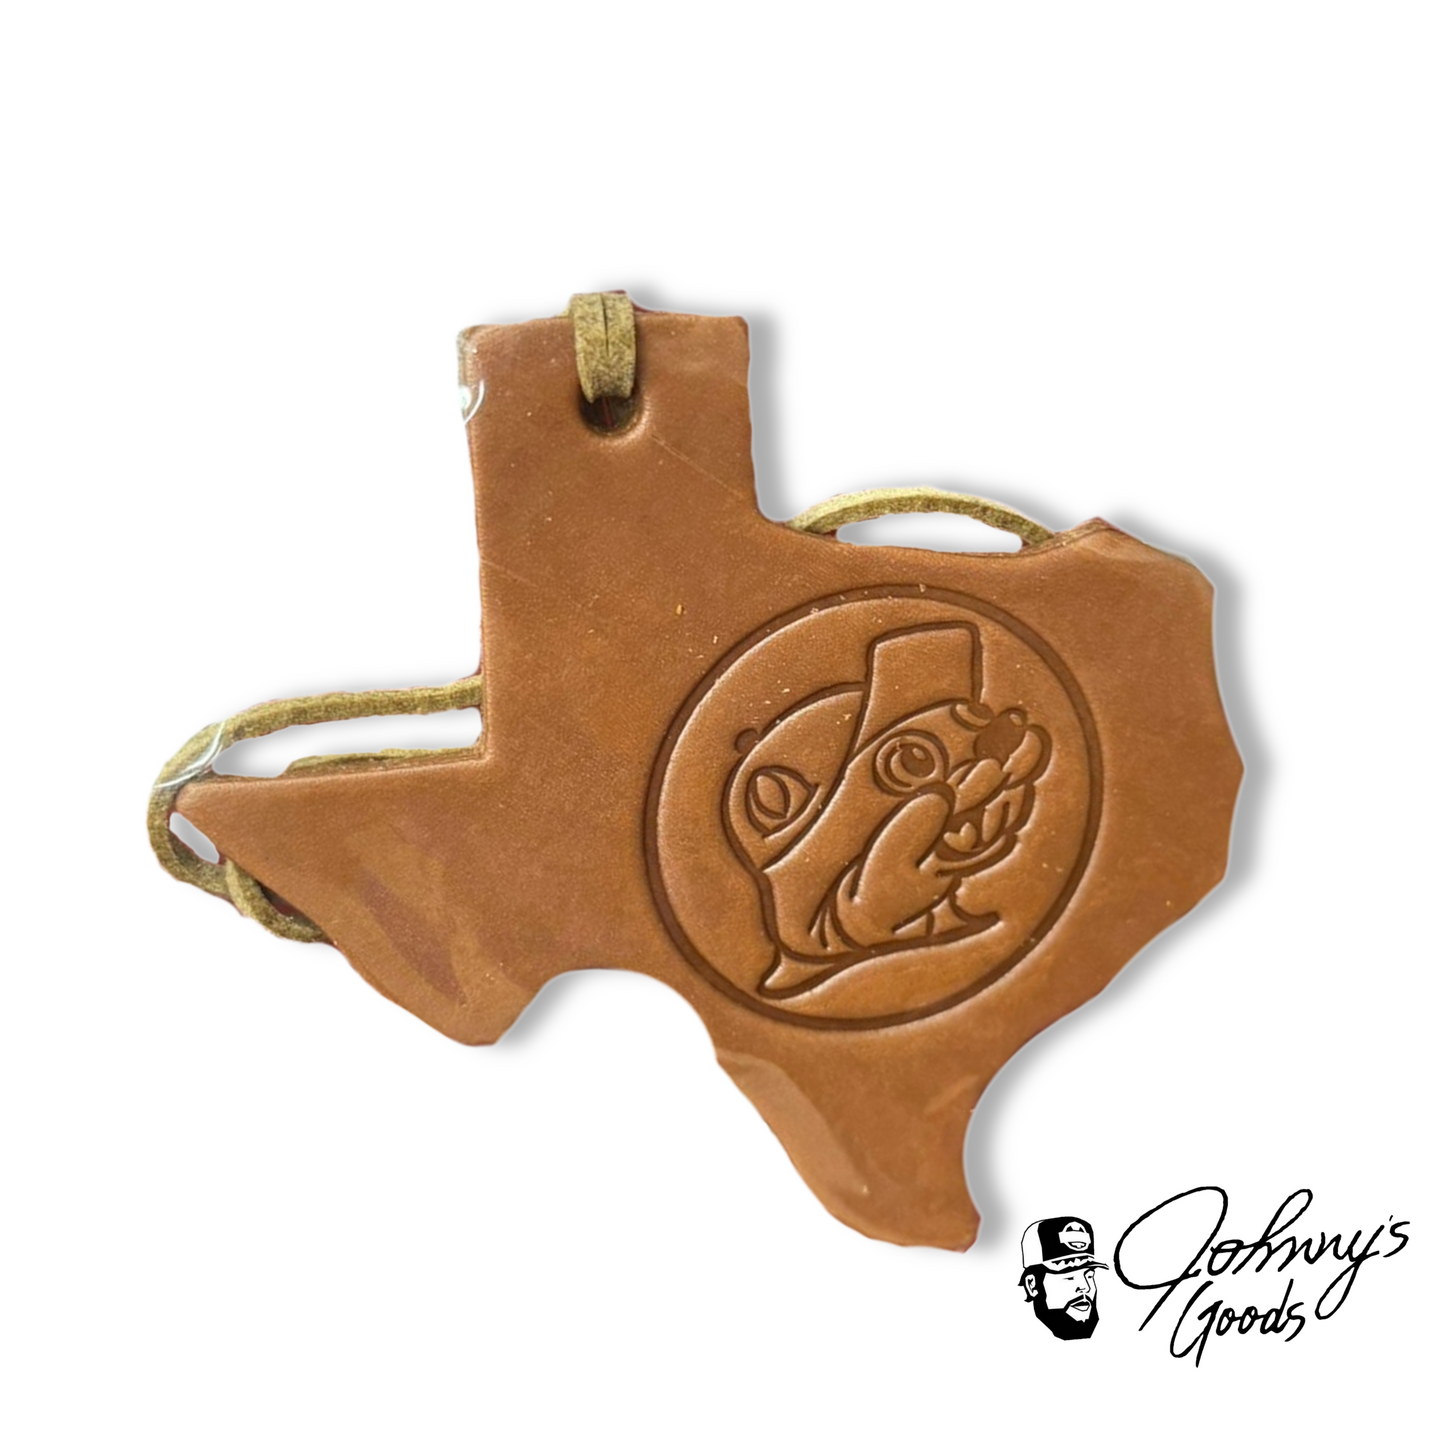 Buc-ee's Air Freshener Callahan Leather Scent